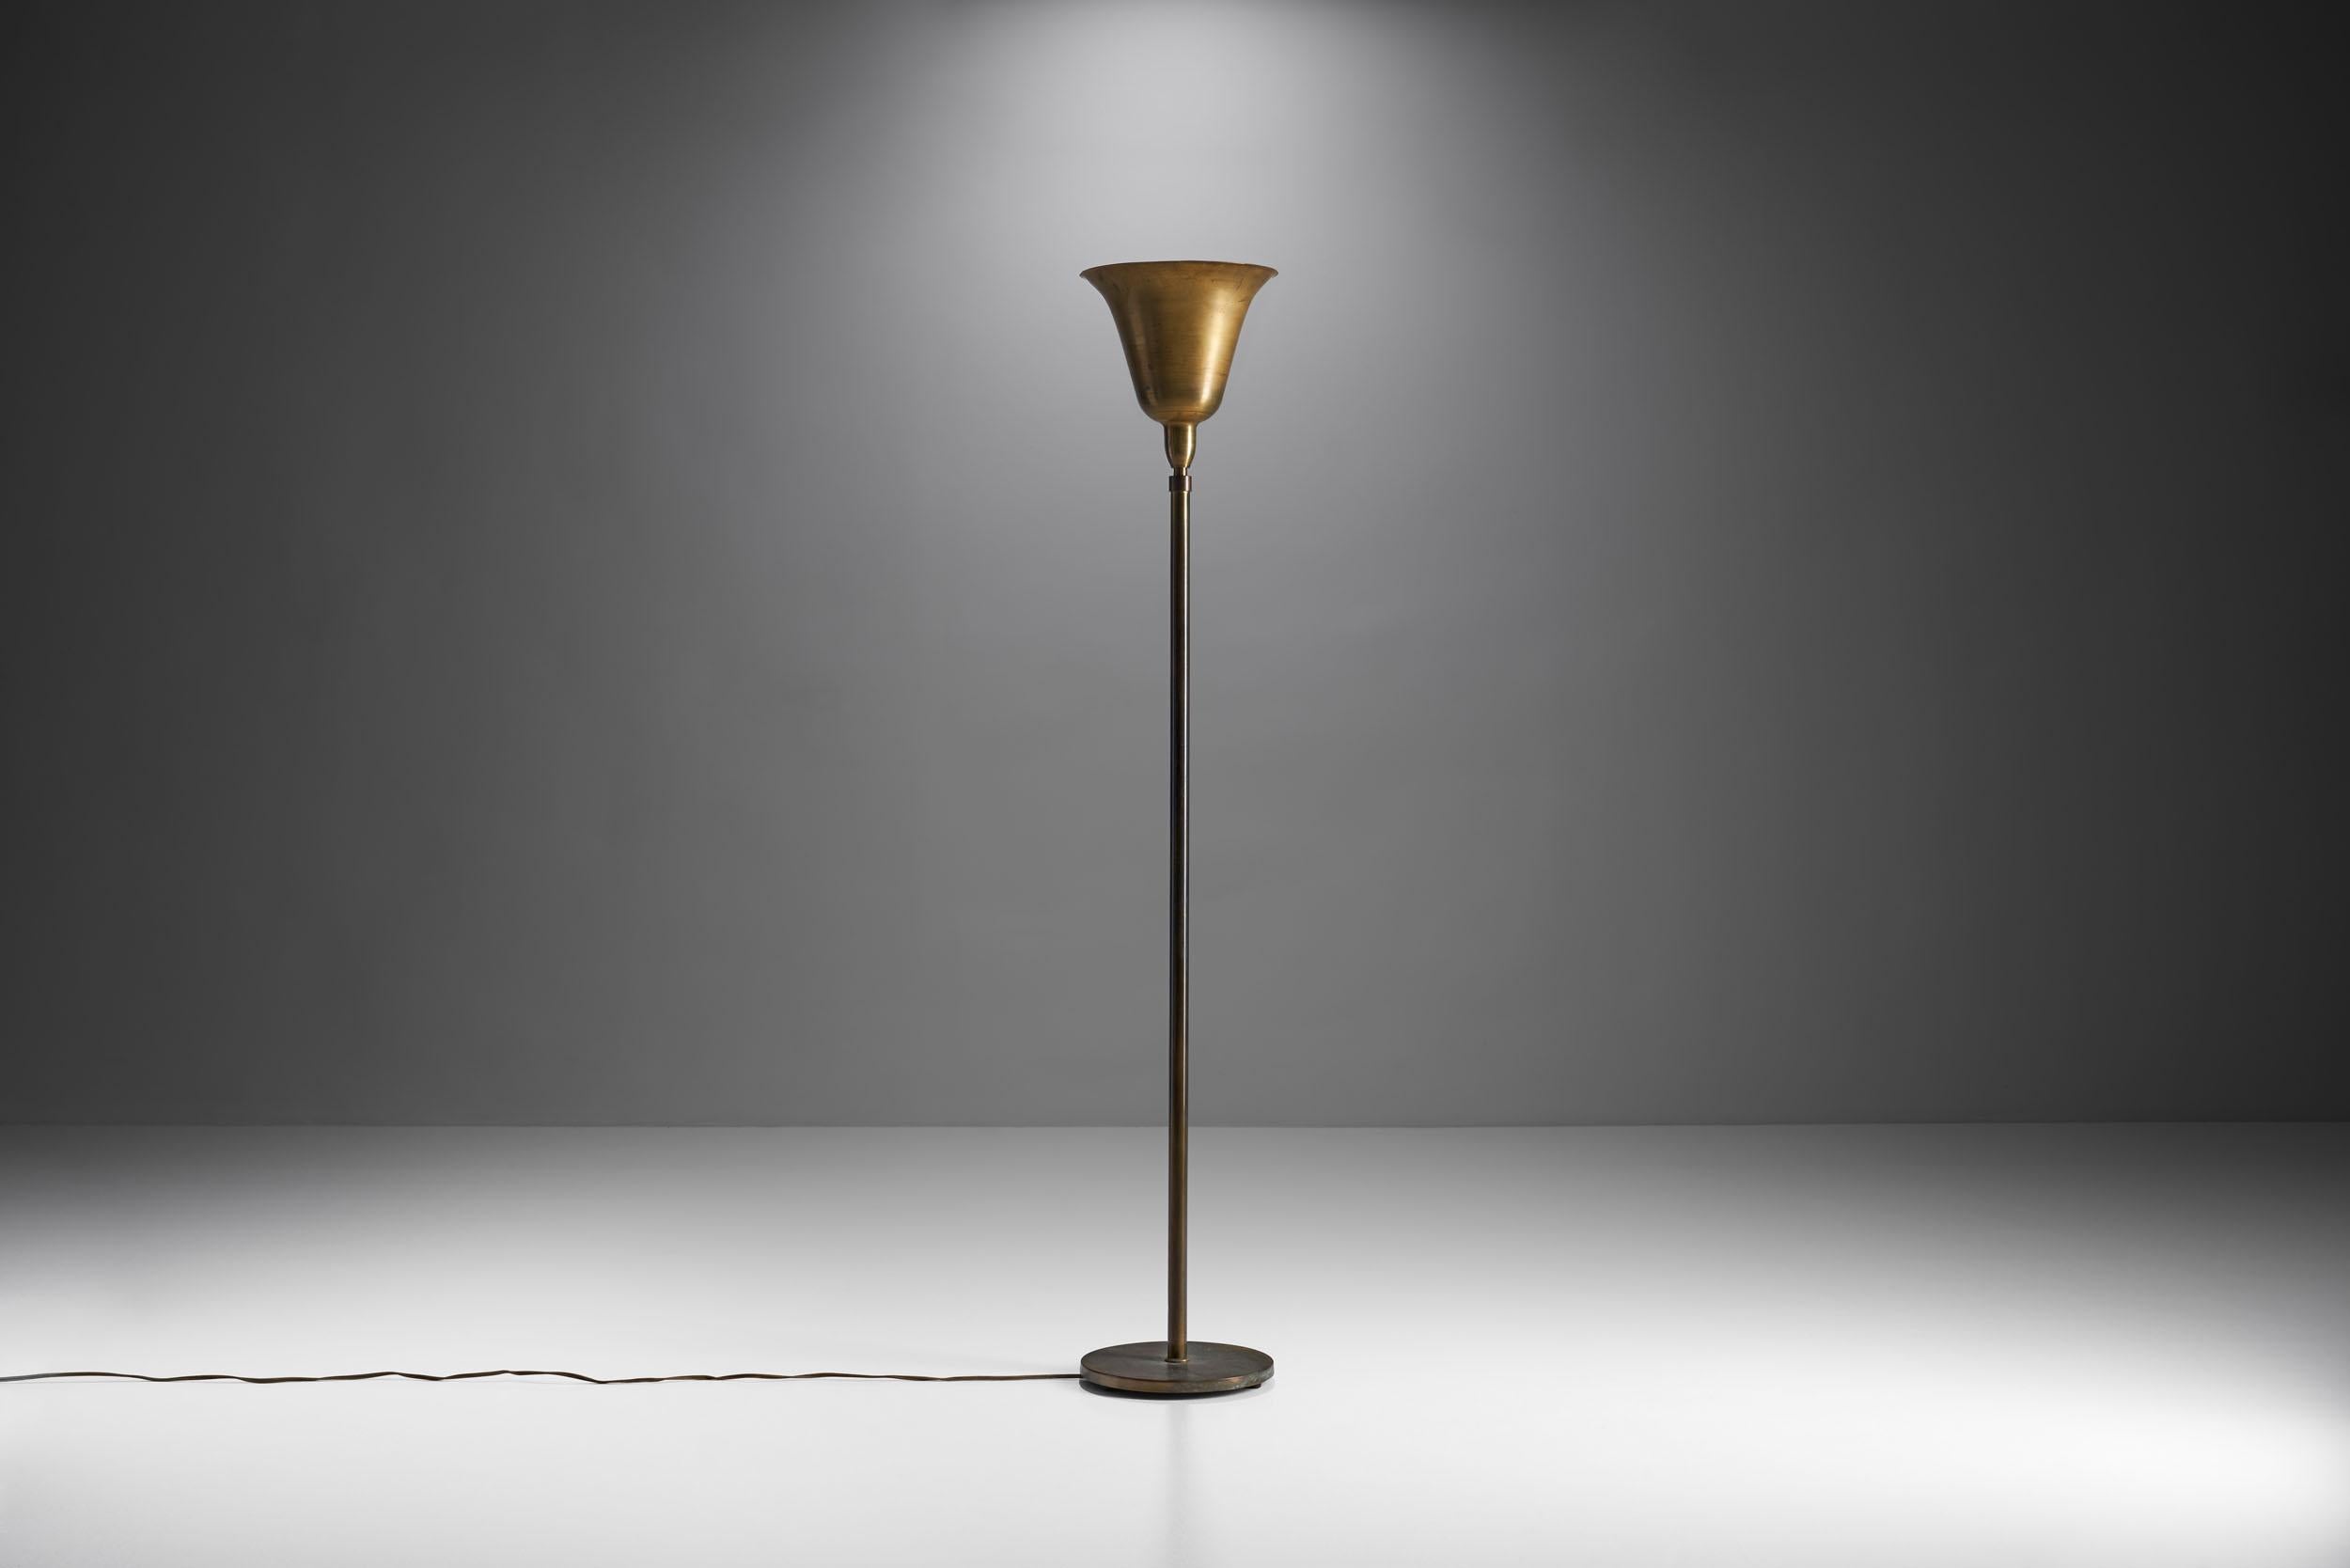 This beautiful midcentury floor lamp combines a classical shape with carefully thought out proportions and Danish craftsmanship.

The head of this lamp resembles the shape of a bell turned upside down, with a Gaussian curve. The brass has a